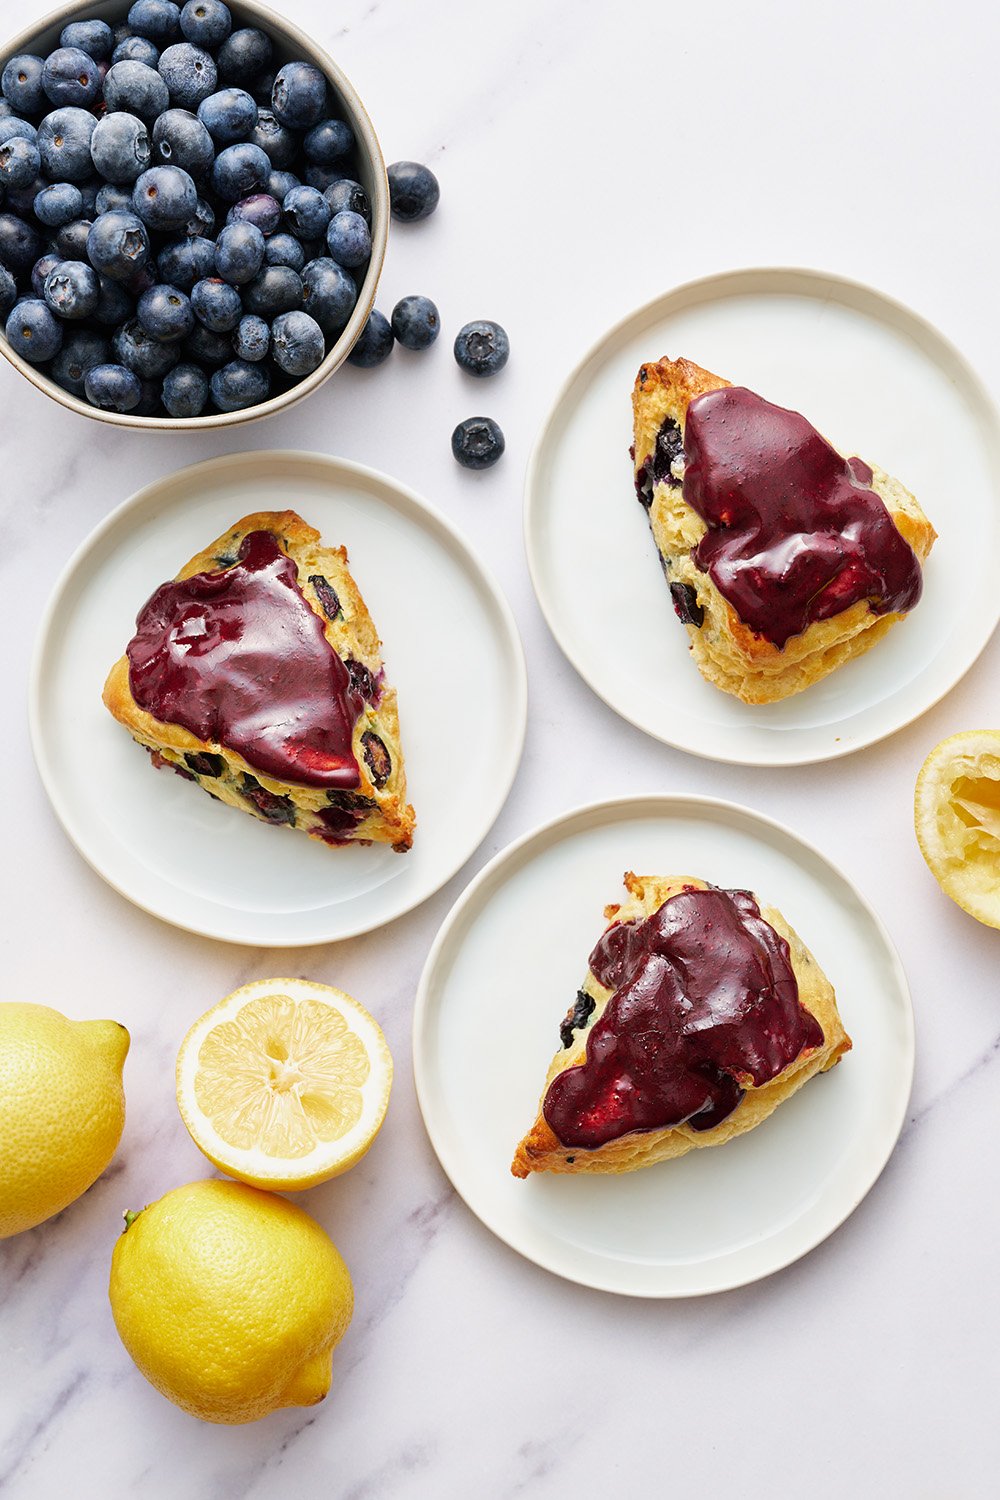 Blueberry Scones on white plates, surrounded by fresh blueberries and lemons.